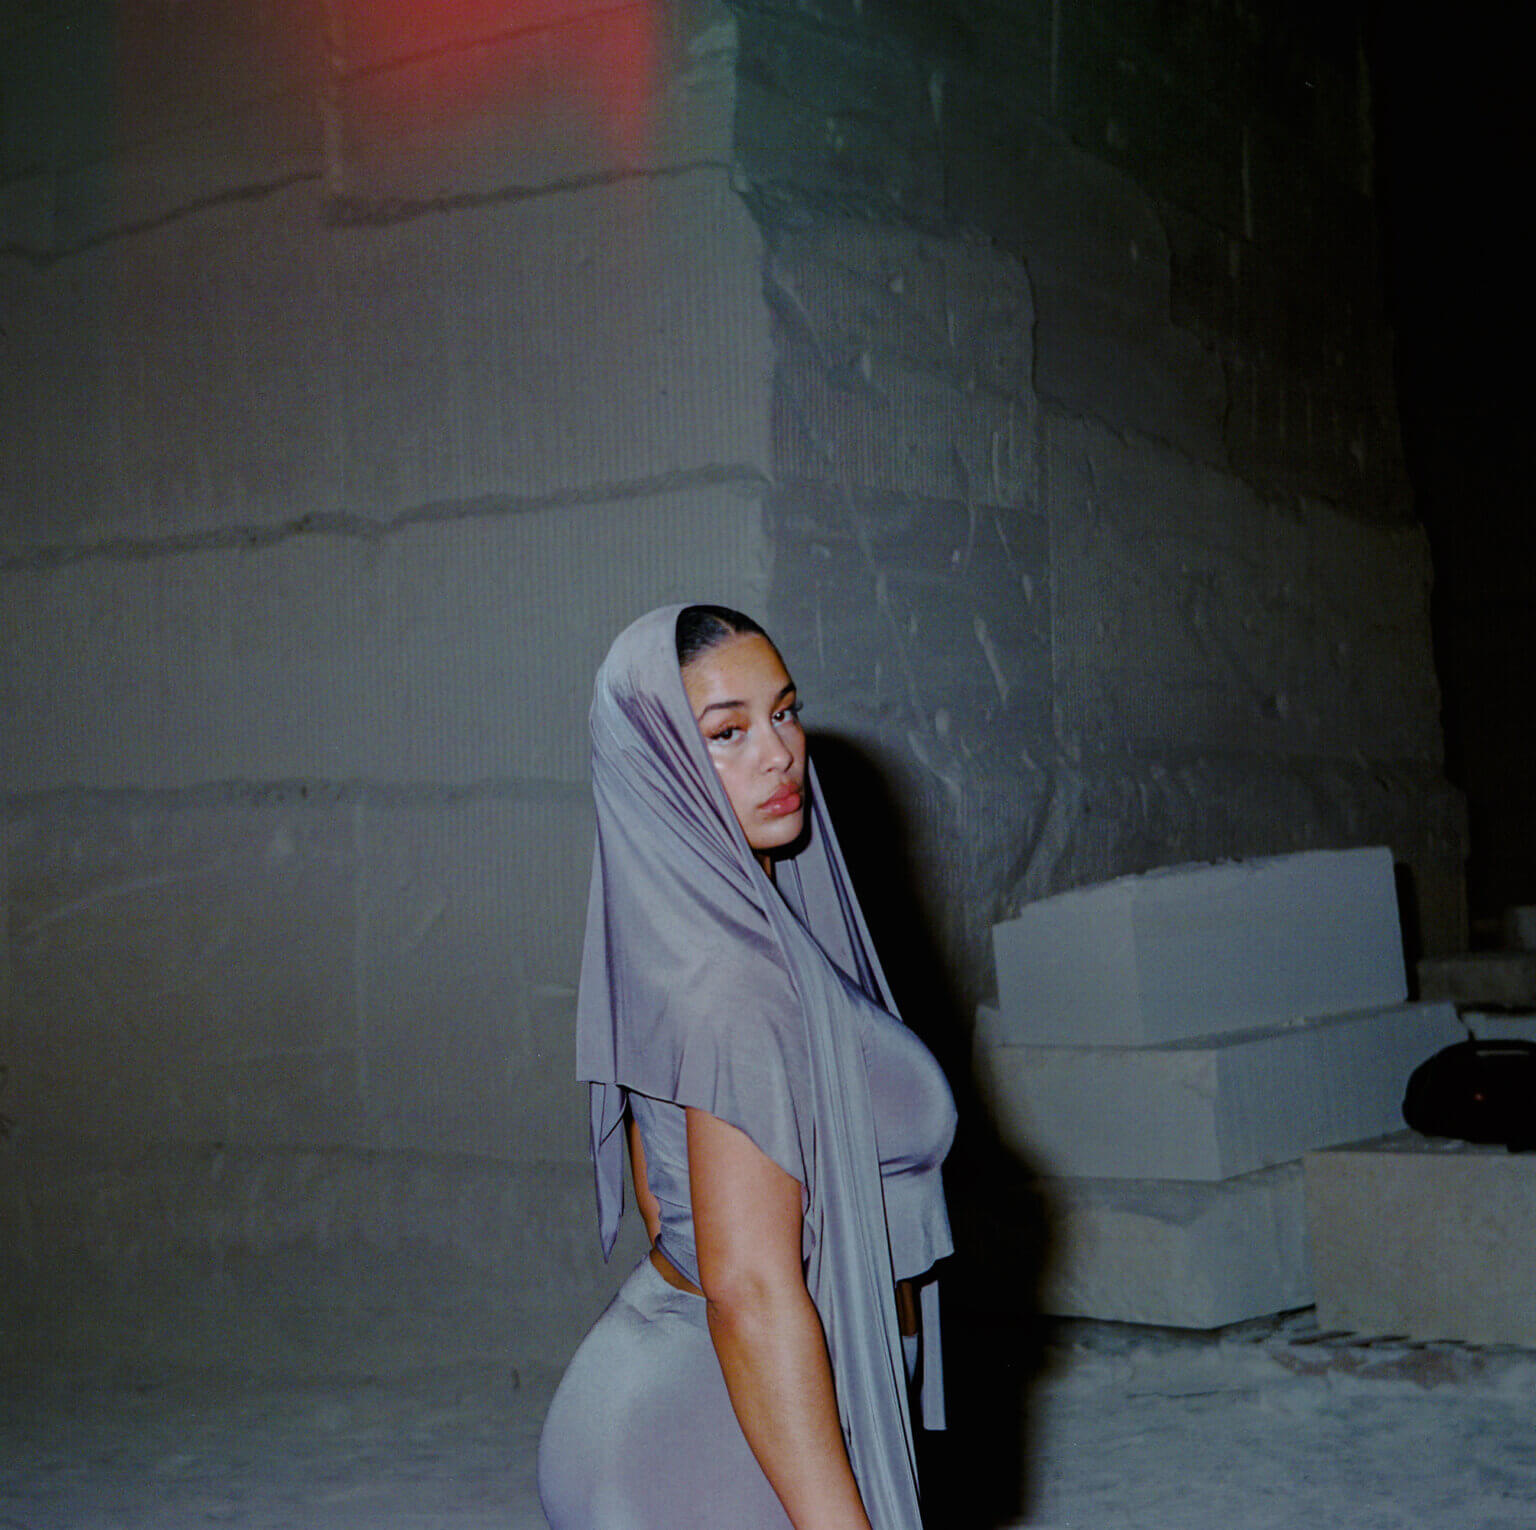 Jorja Smith has made her long-awaited return with her new single "Try Me"